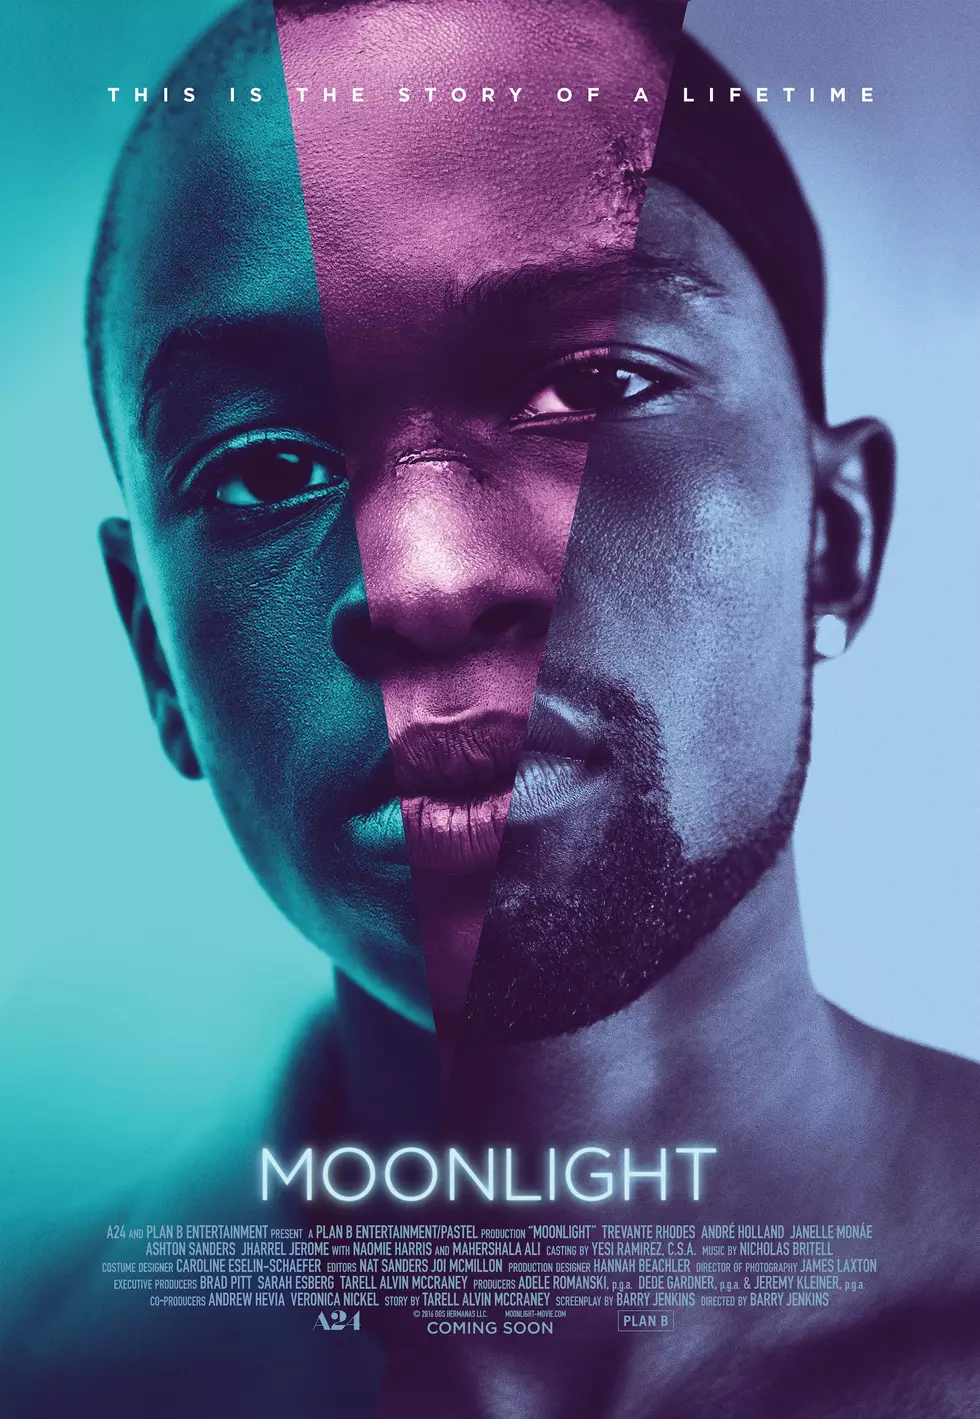 ‘Moonlight’ Wins Best Picture After Major Flub at 2017 Oscars